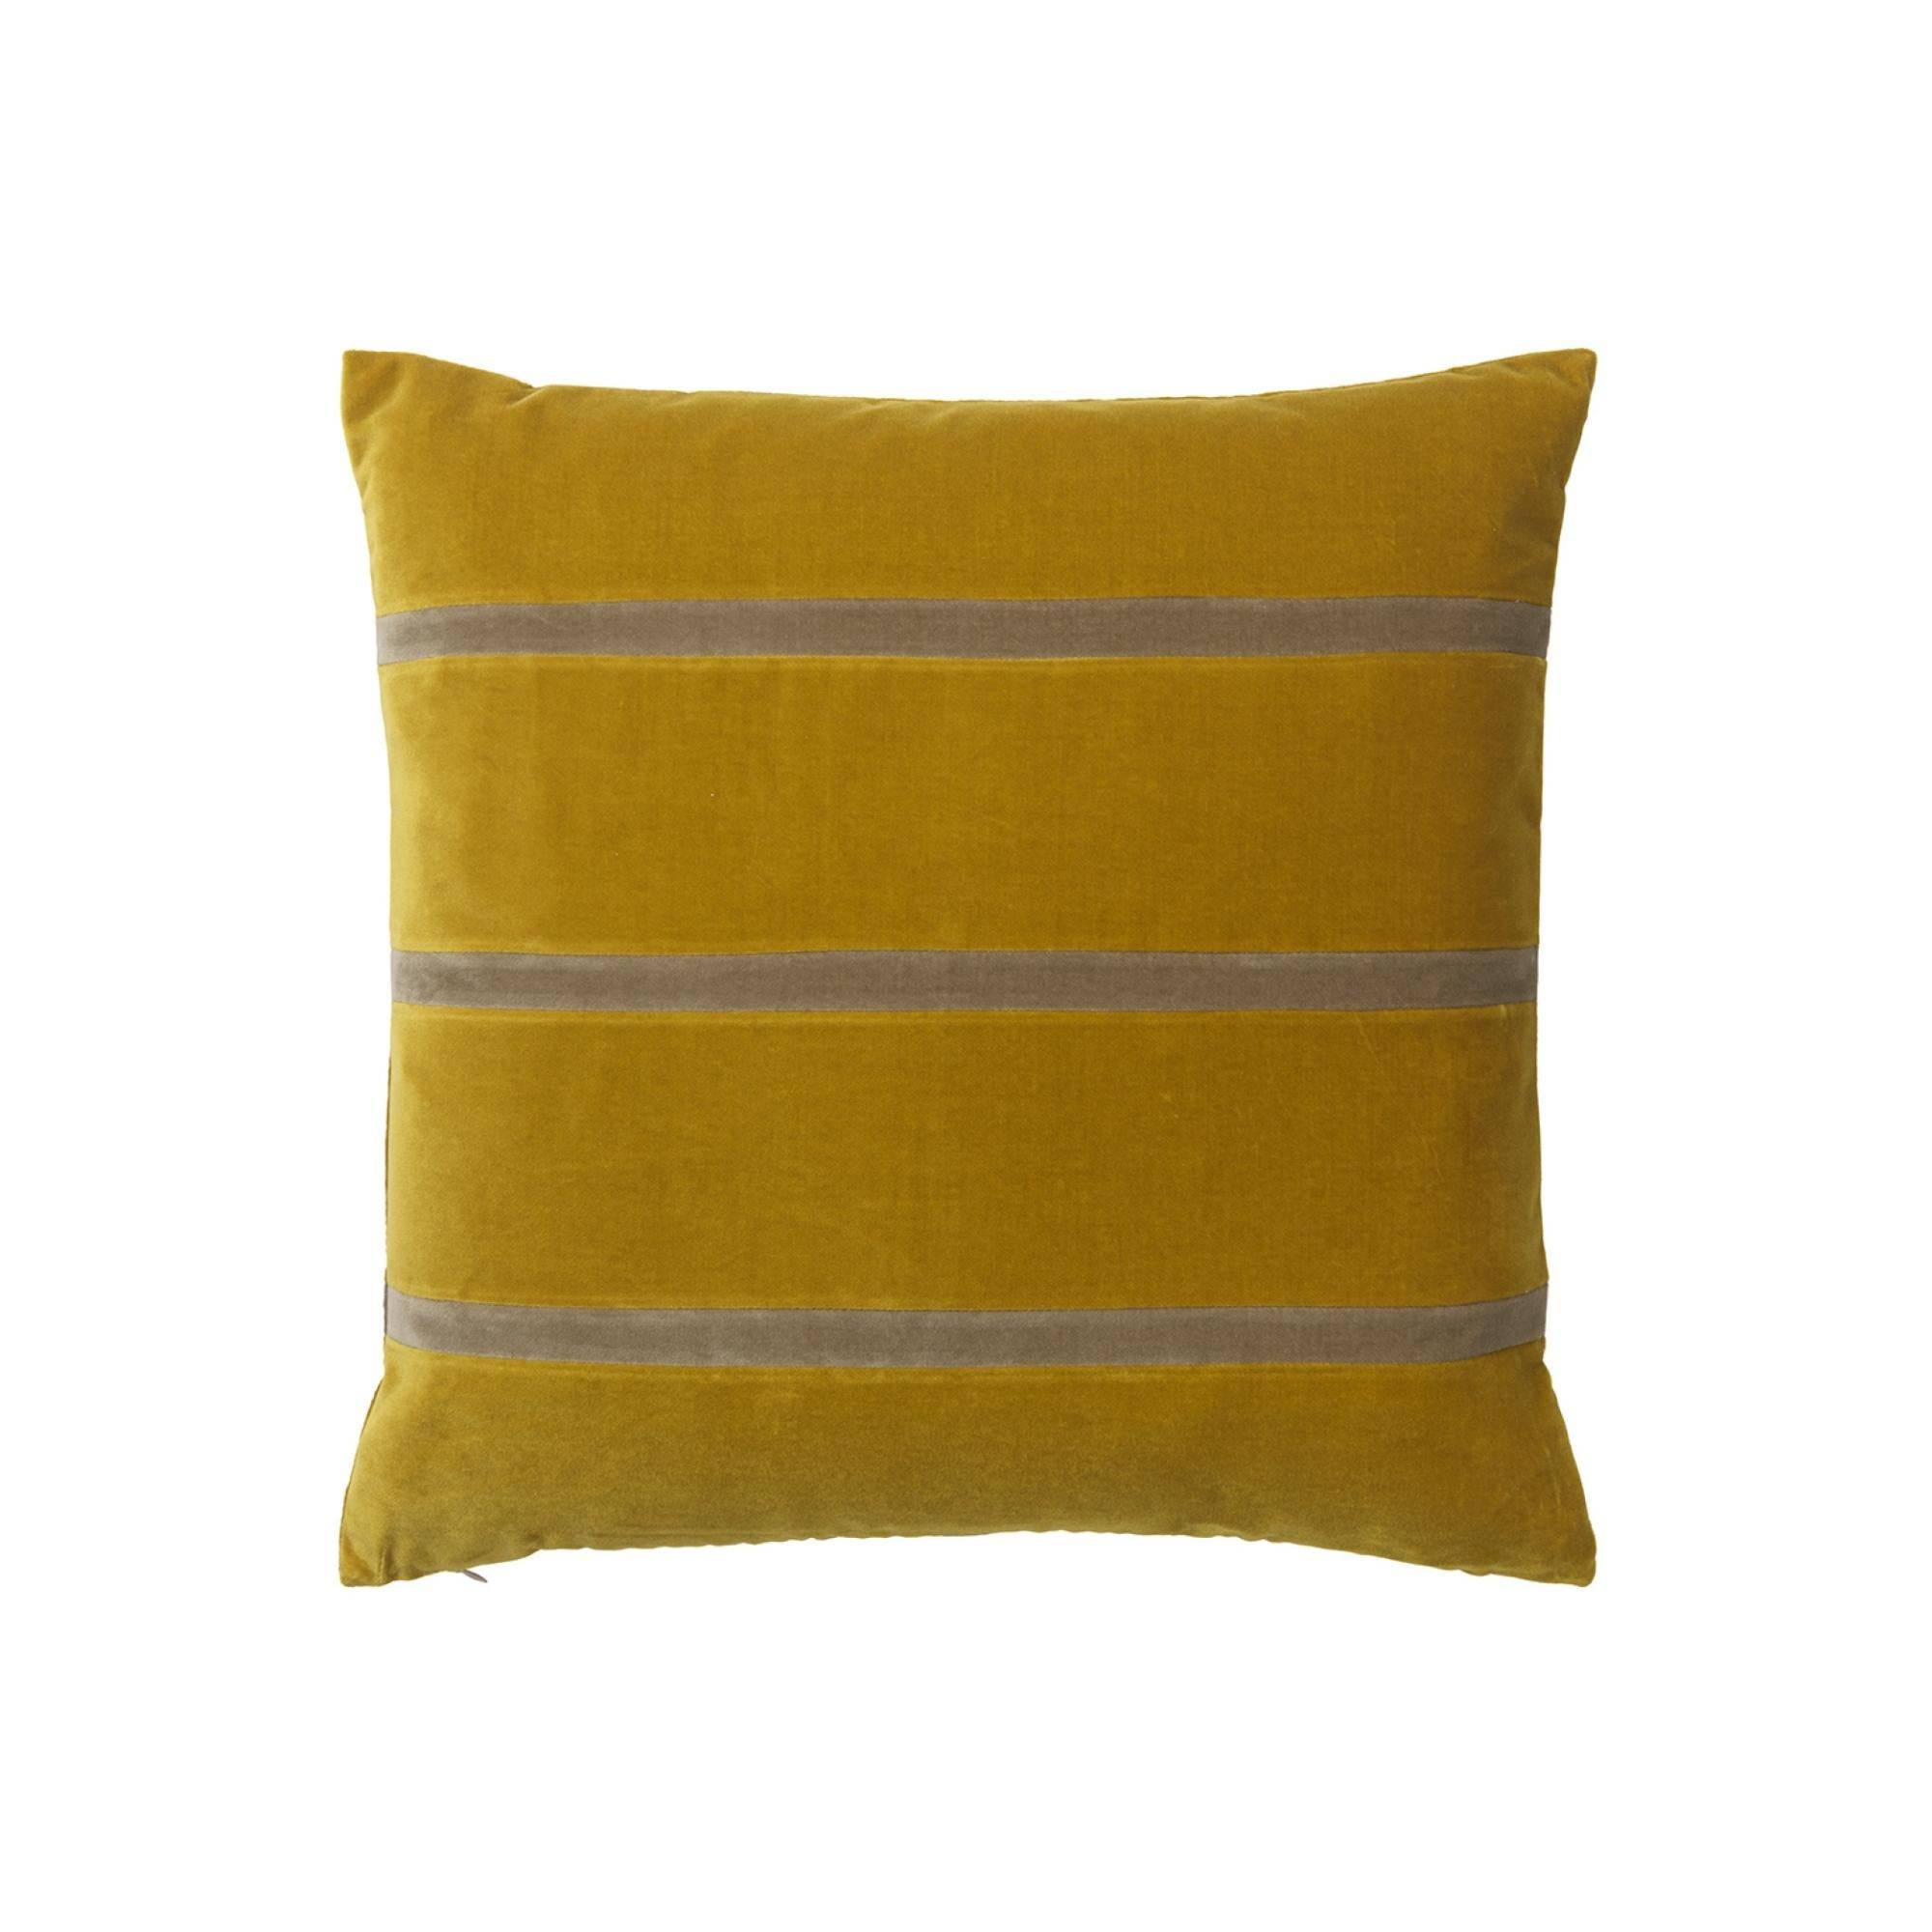 Gemma Cushion - Golden Olive & Taupe - THAT COOL LIVING